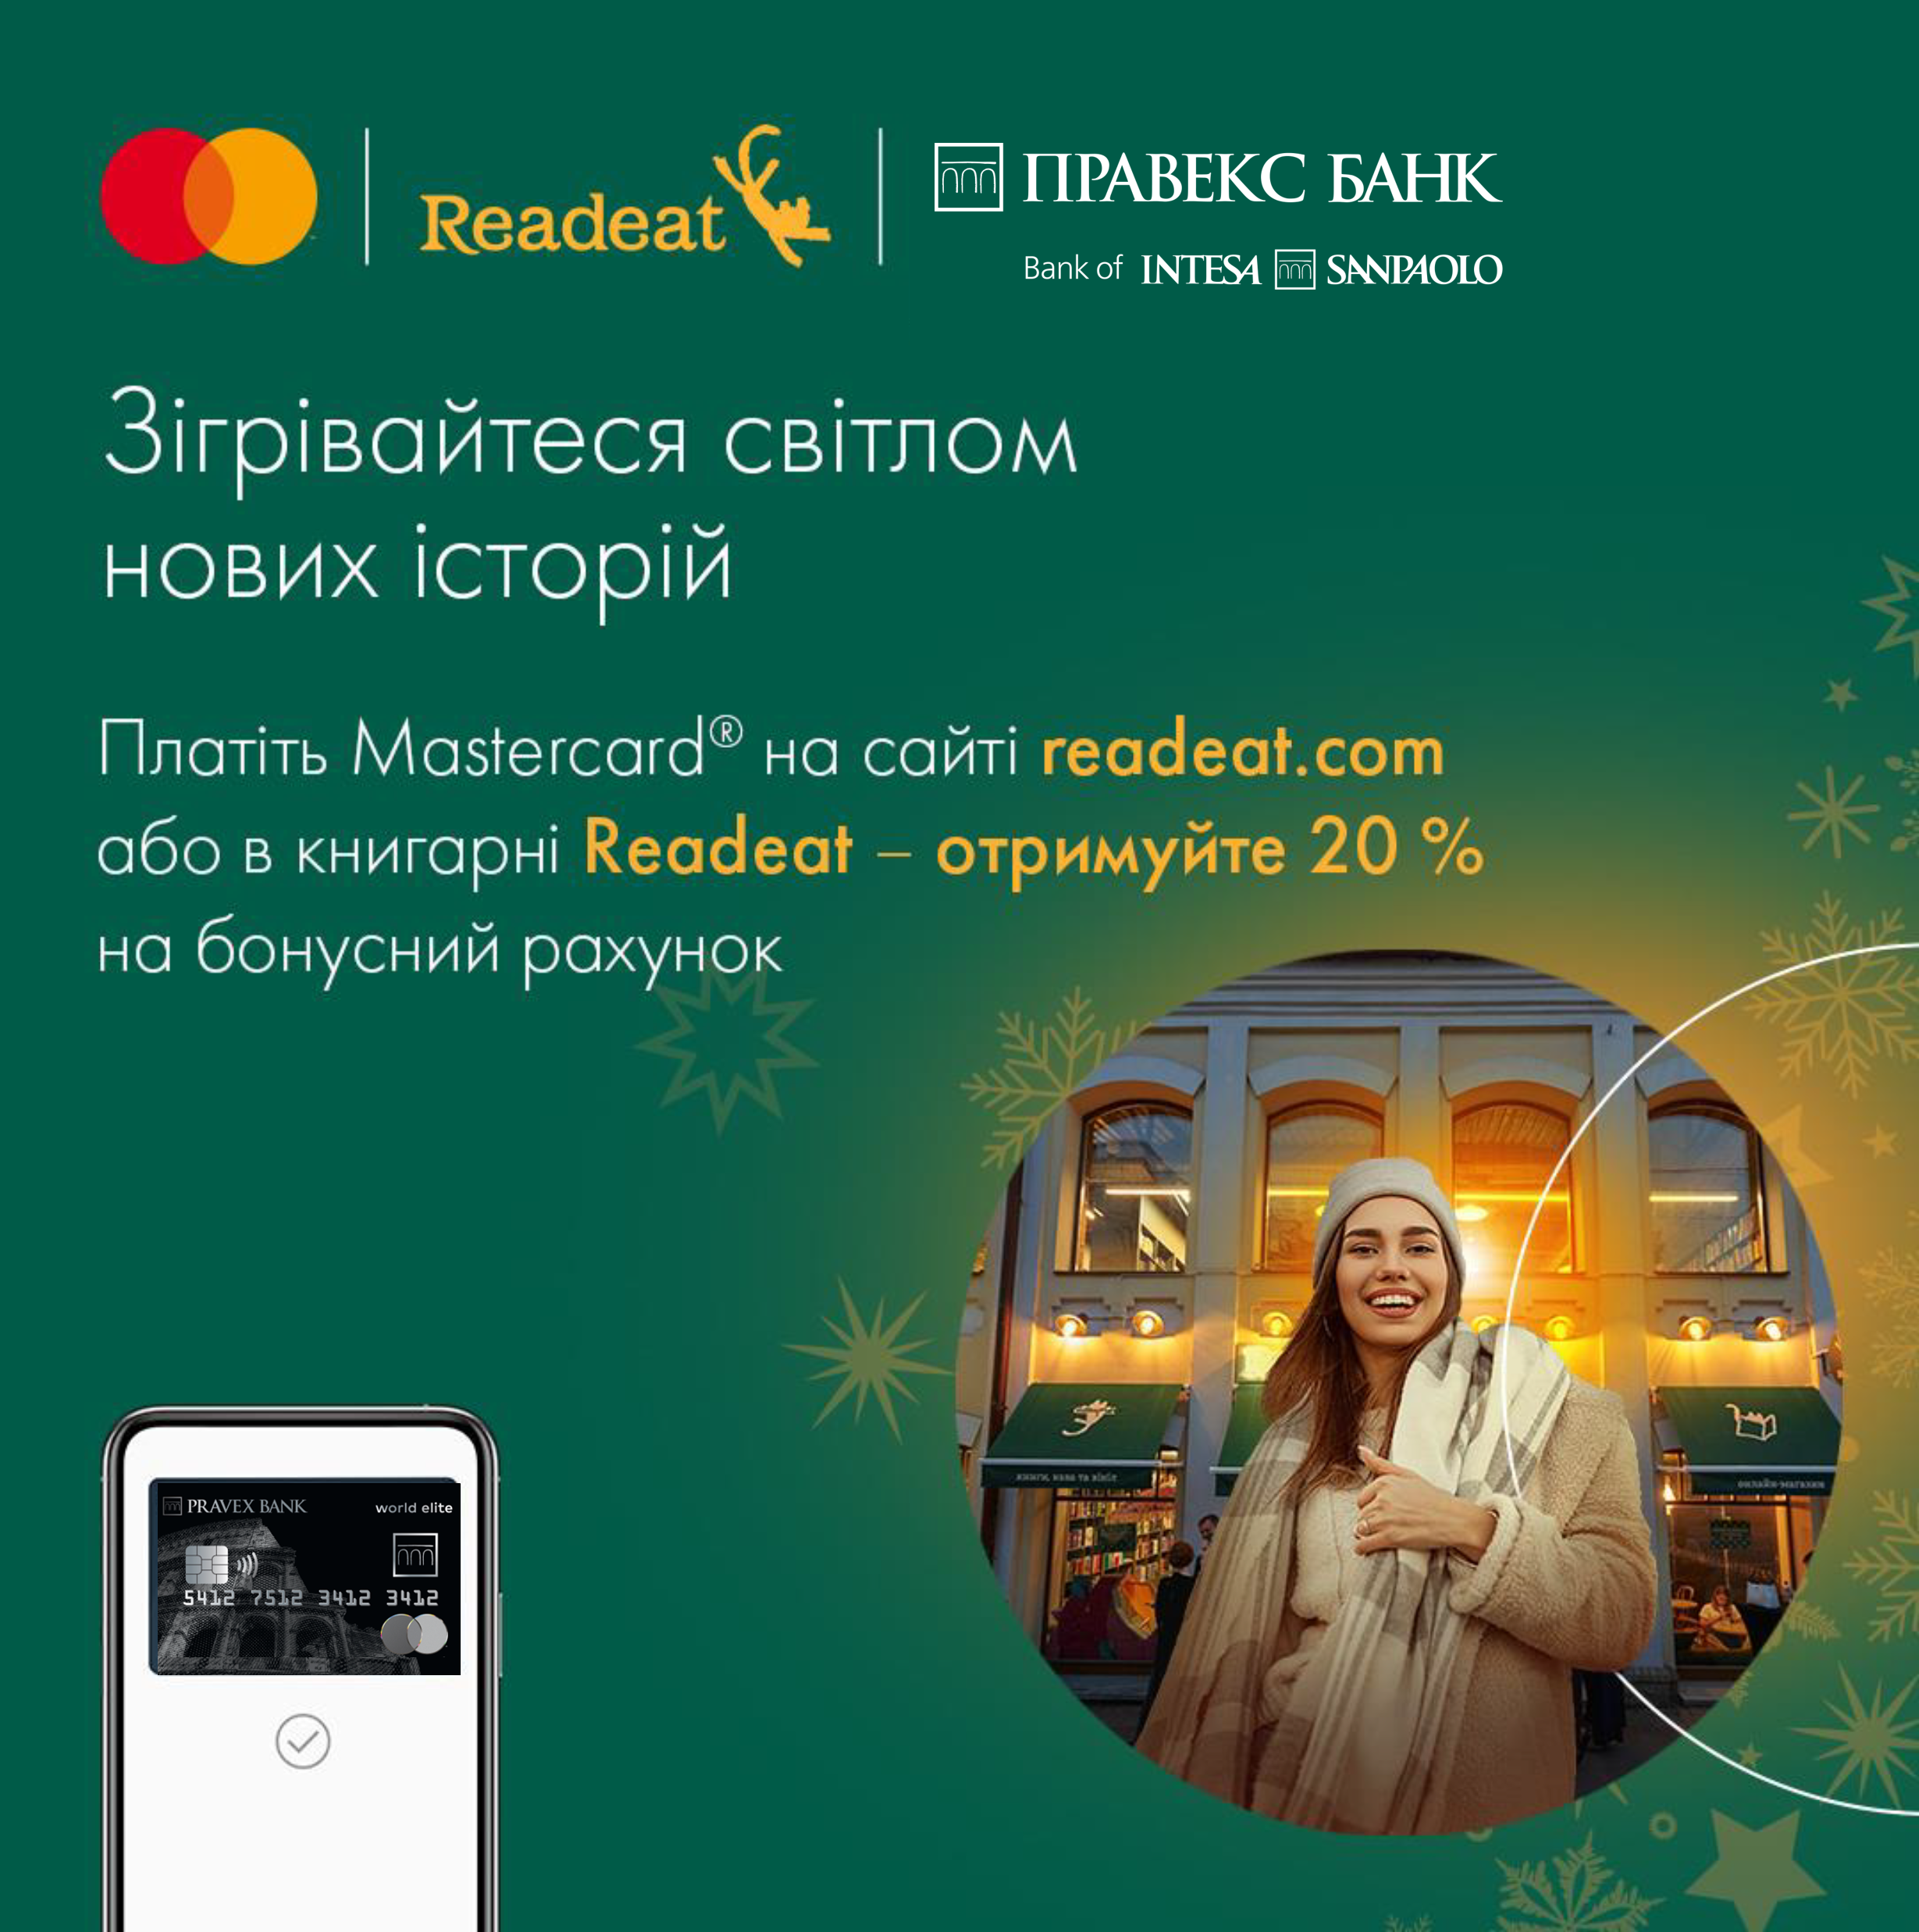 Special offer from Mastercard and Readeat bookstore